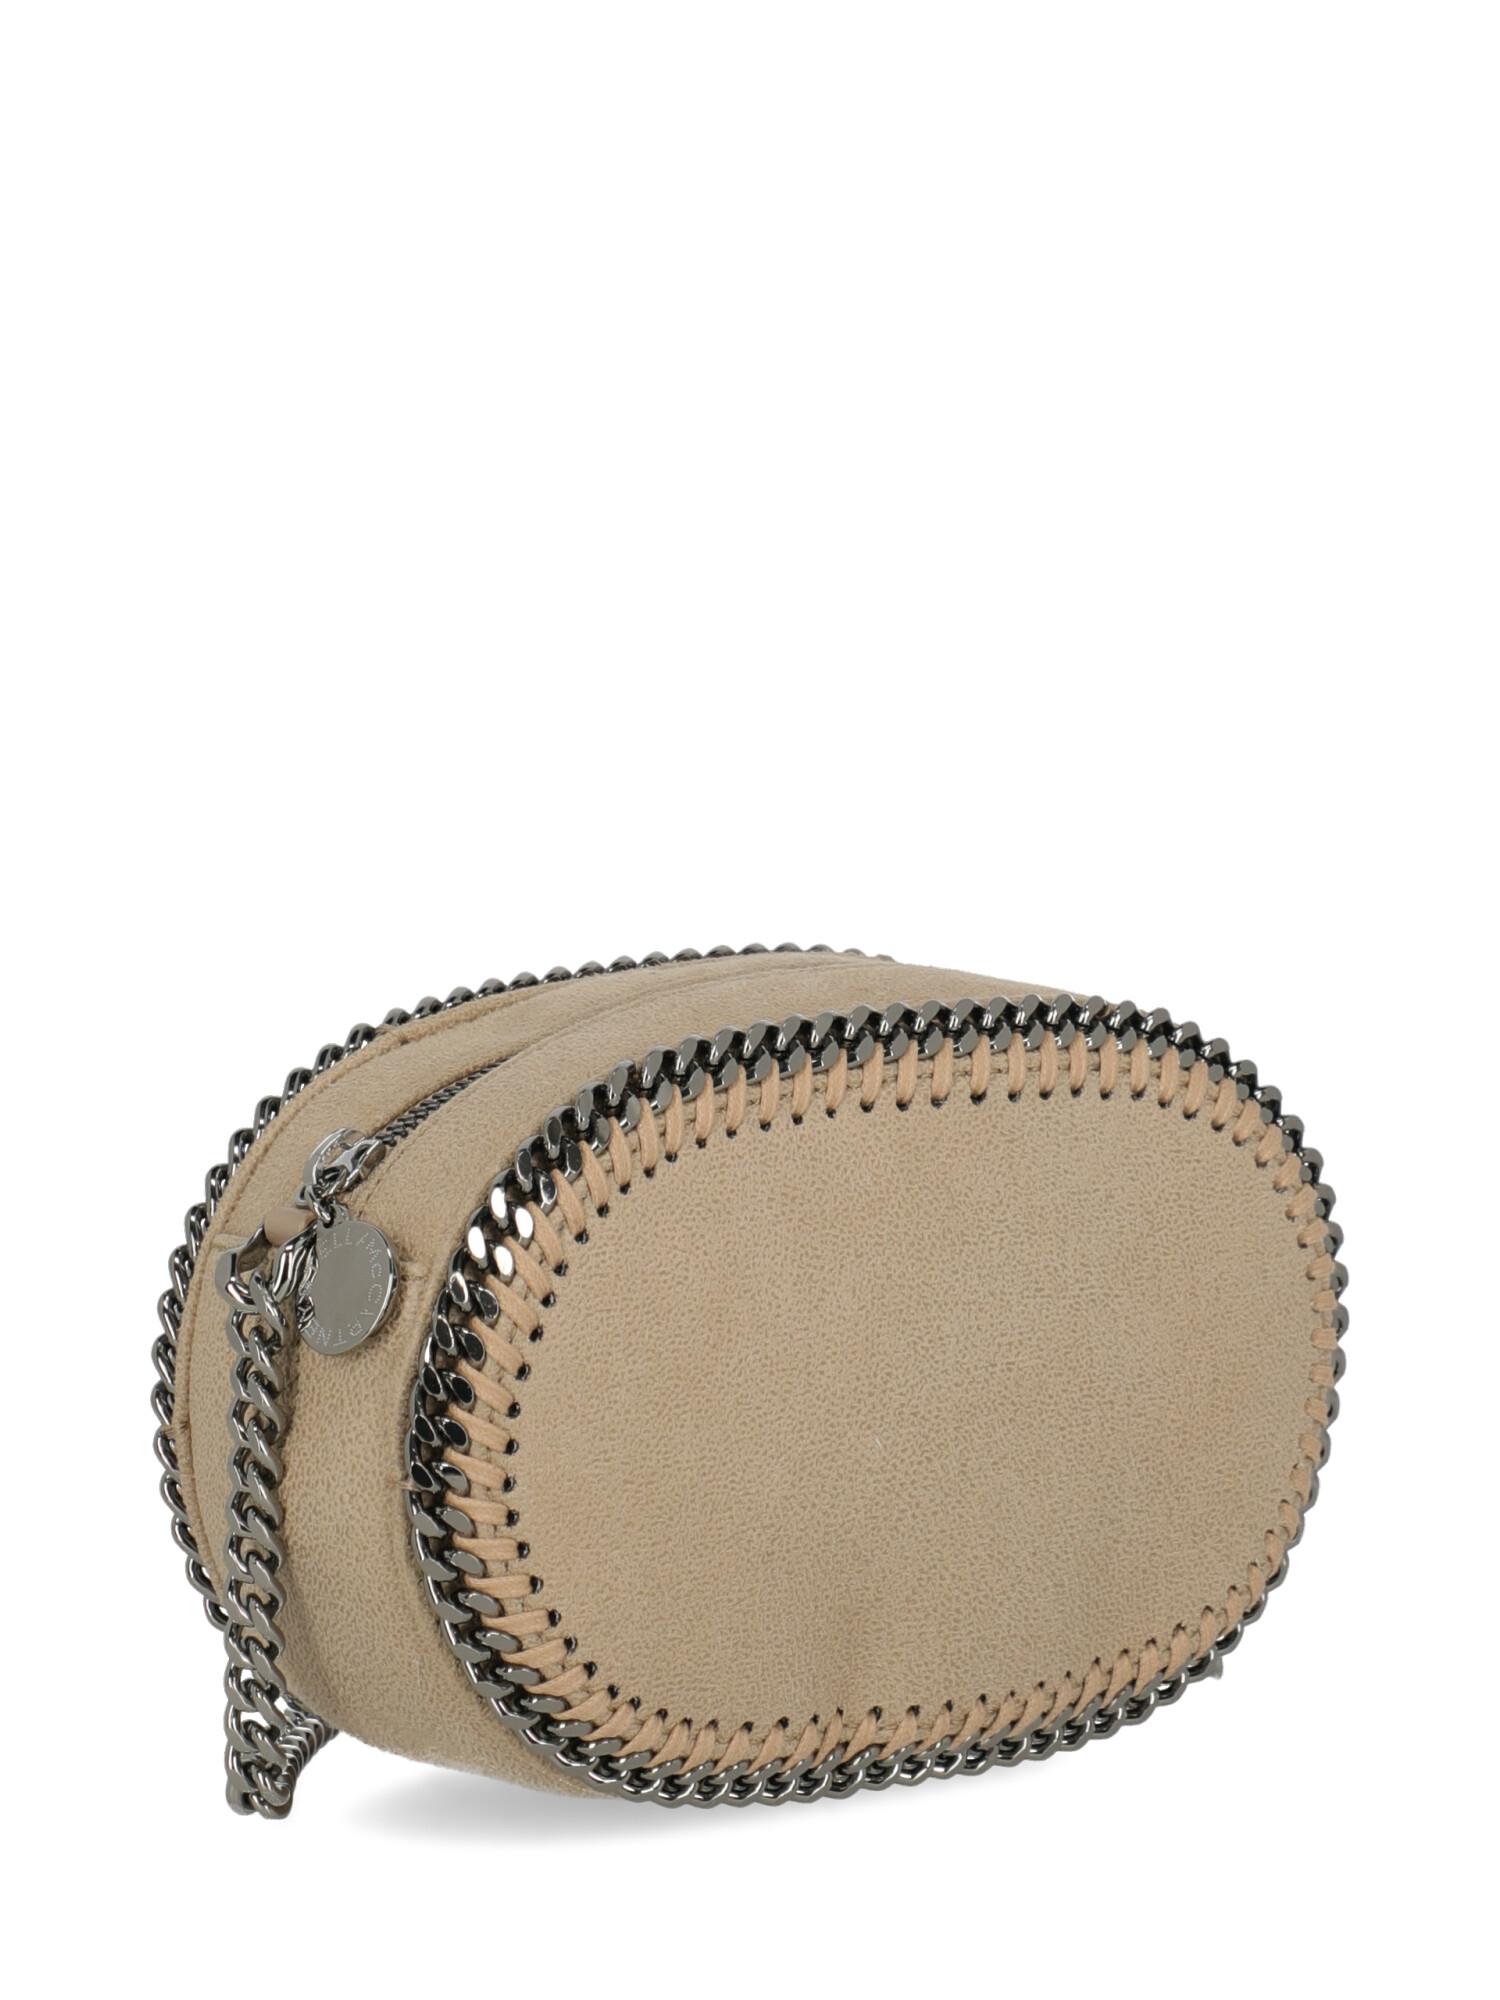 Stella Mccartney Woman Shoulder bag Falabella Beige Faux Leather In Excellent Condition For Sale In Milan, IT